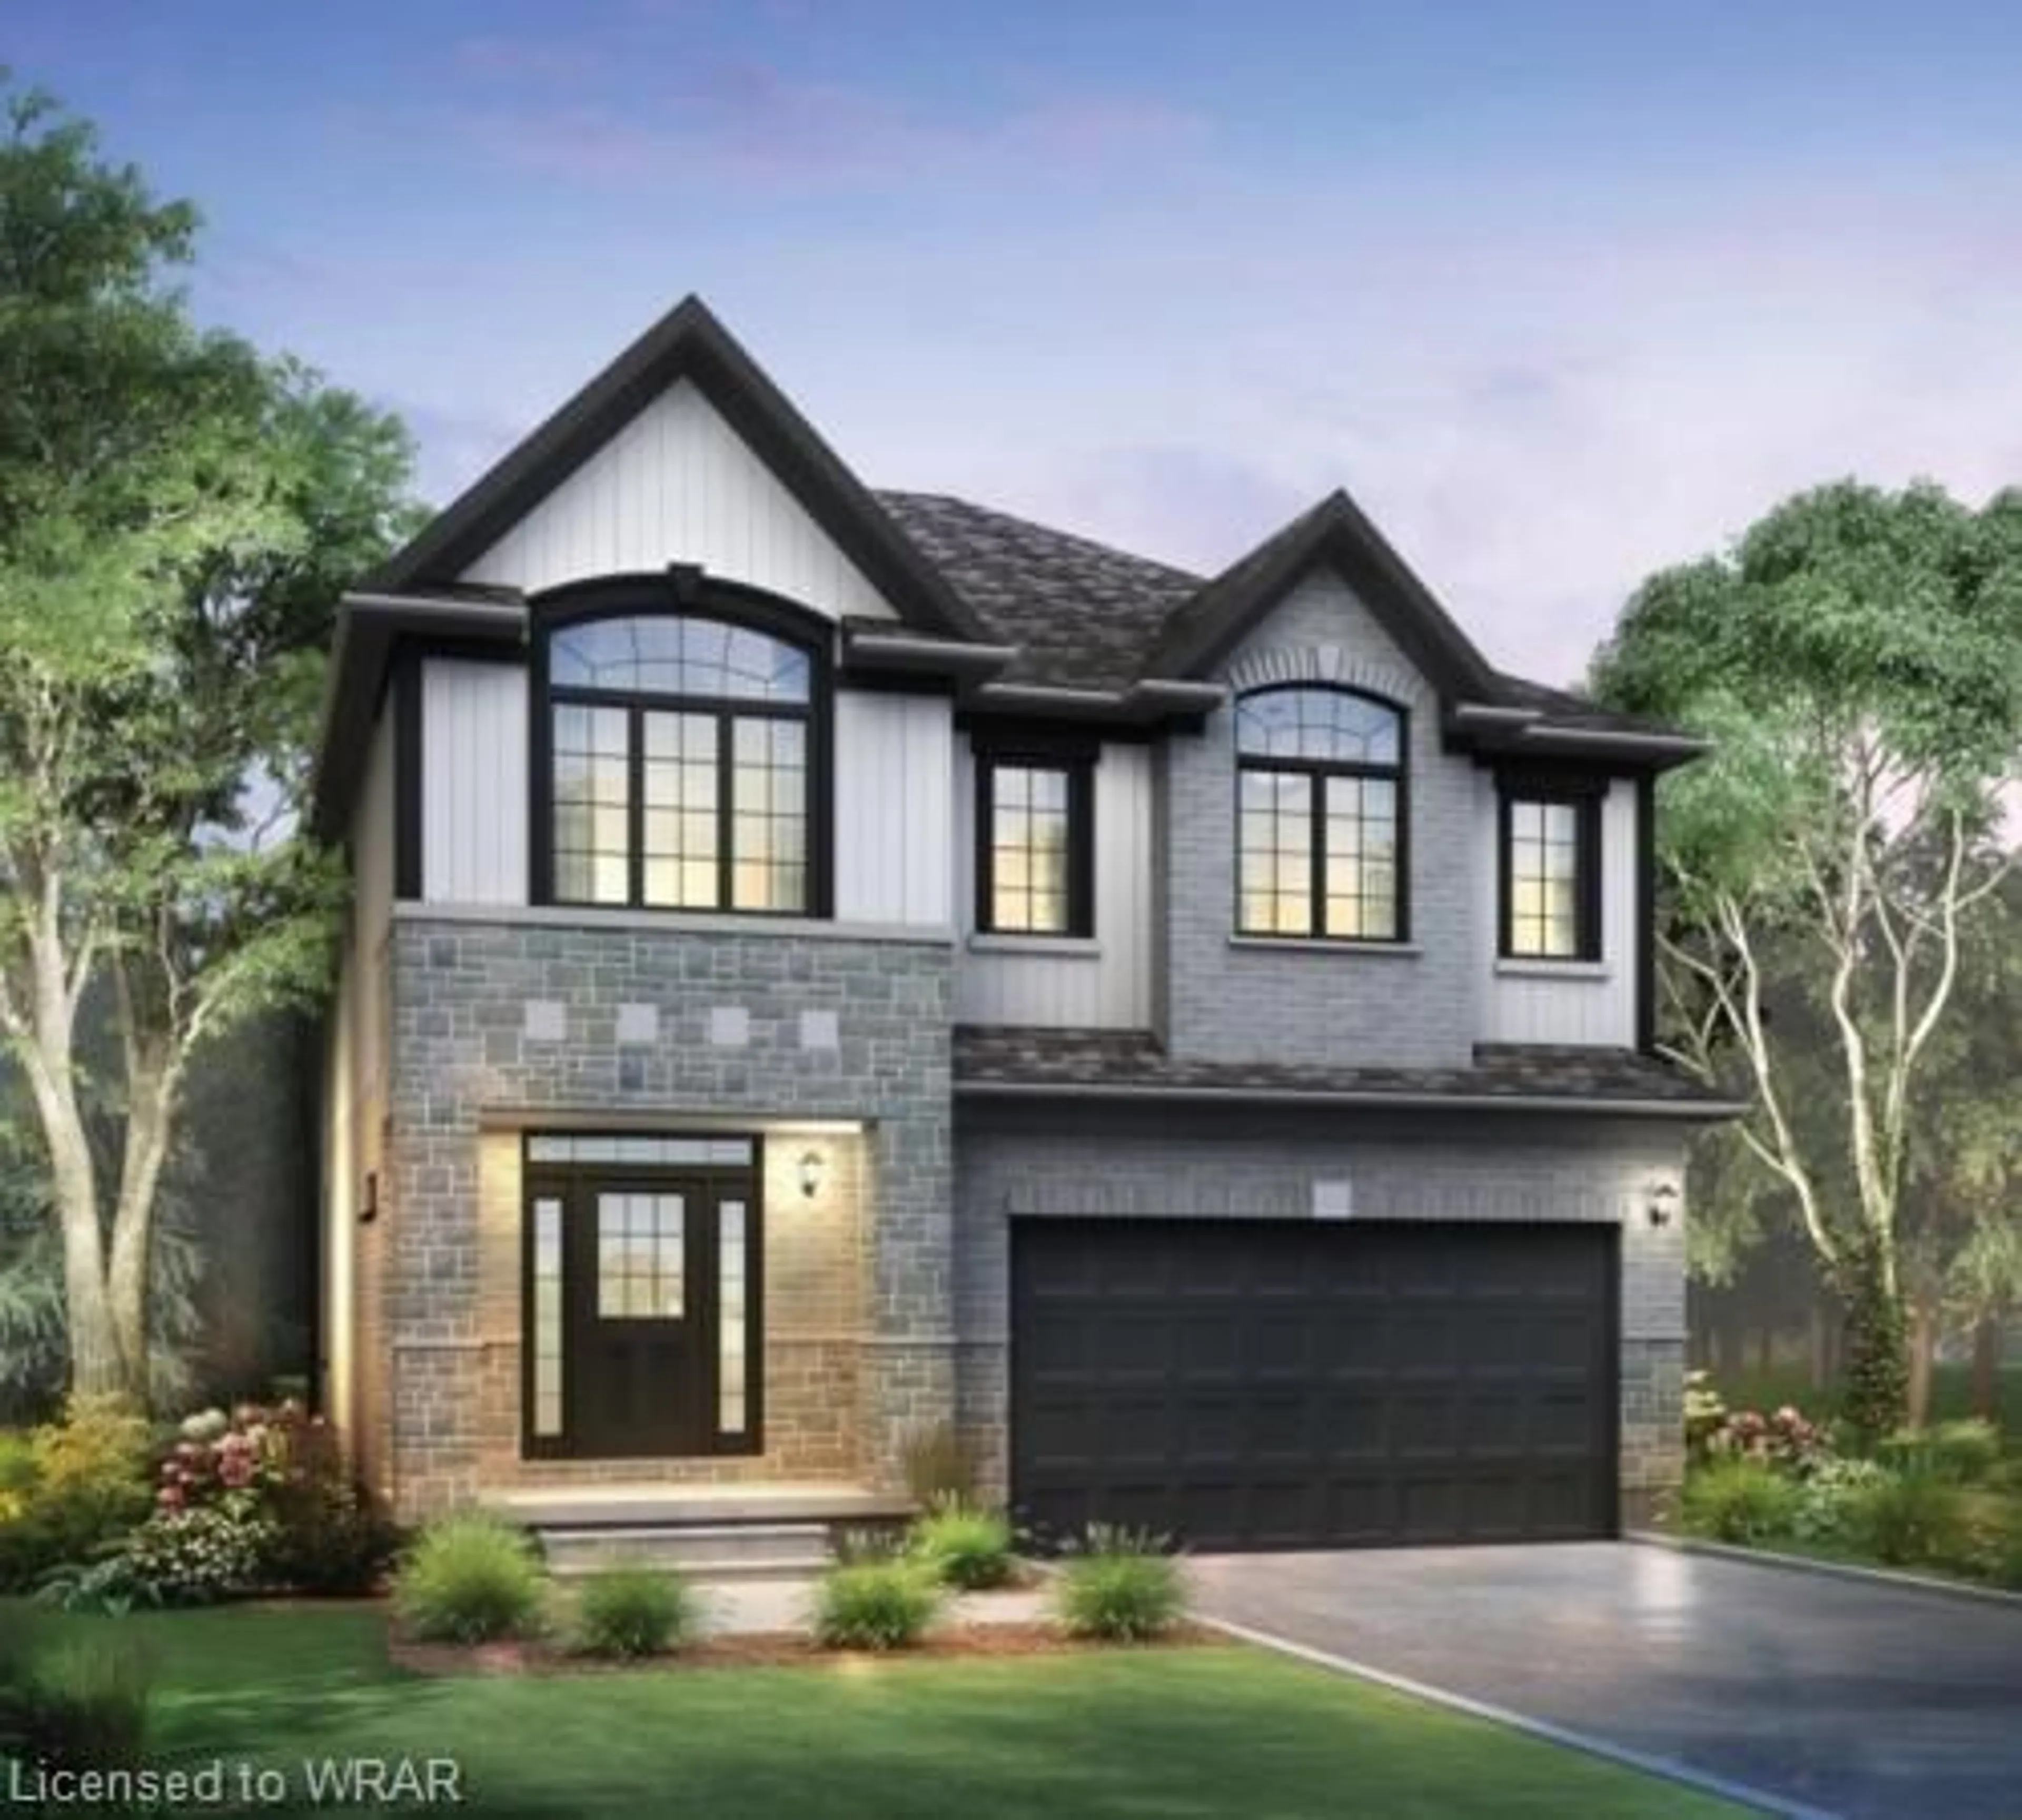 Home with brick exterior material for 541 Balsam Poplar St, Waterloo Ontario N2V 0H8